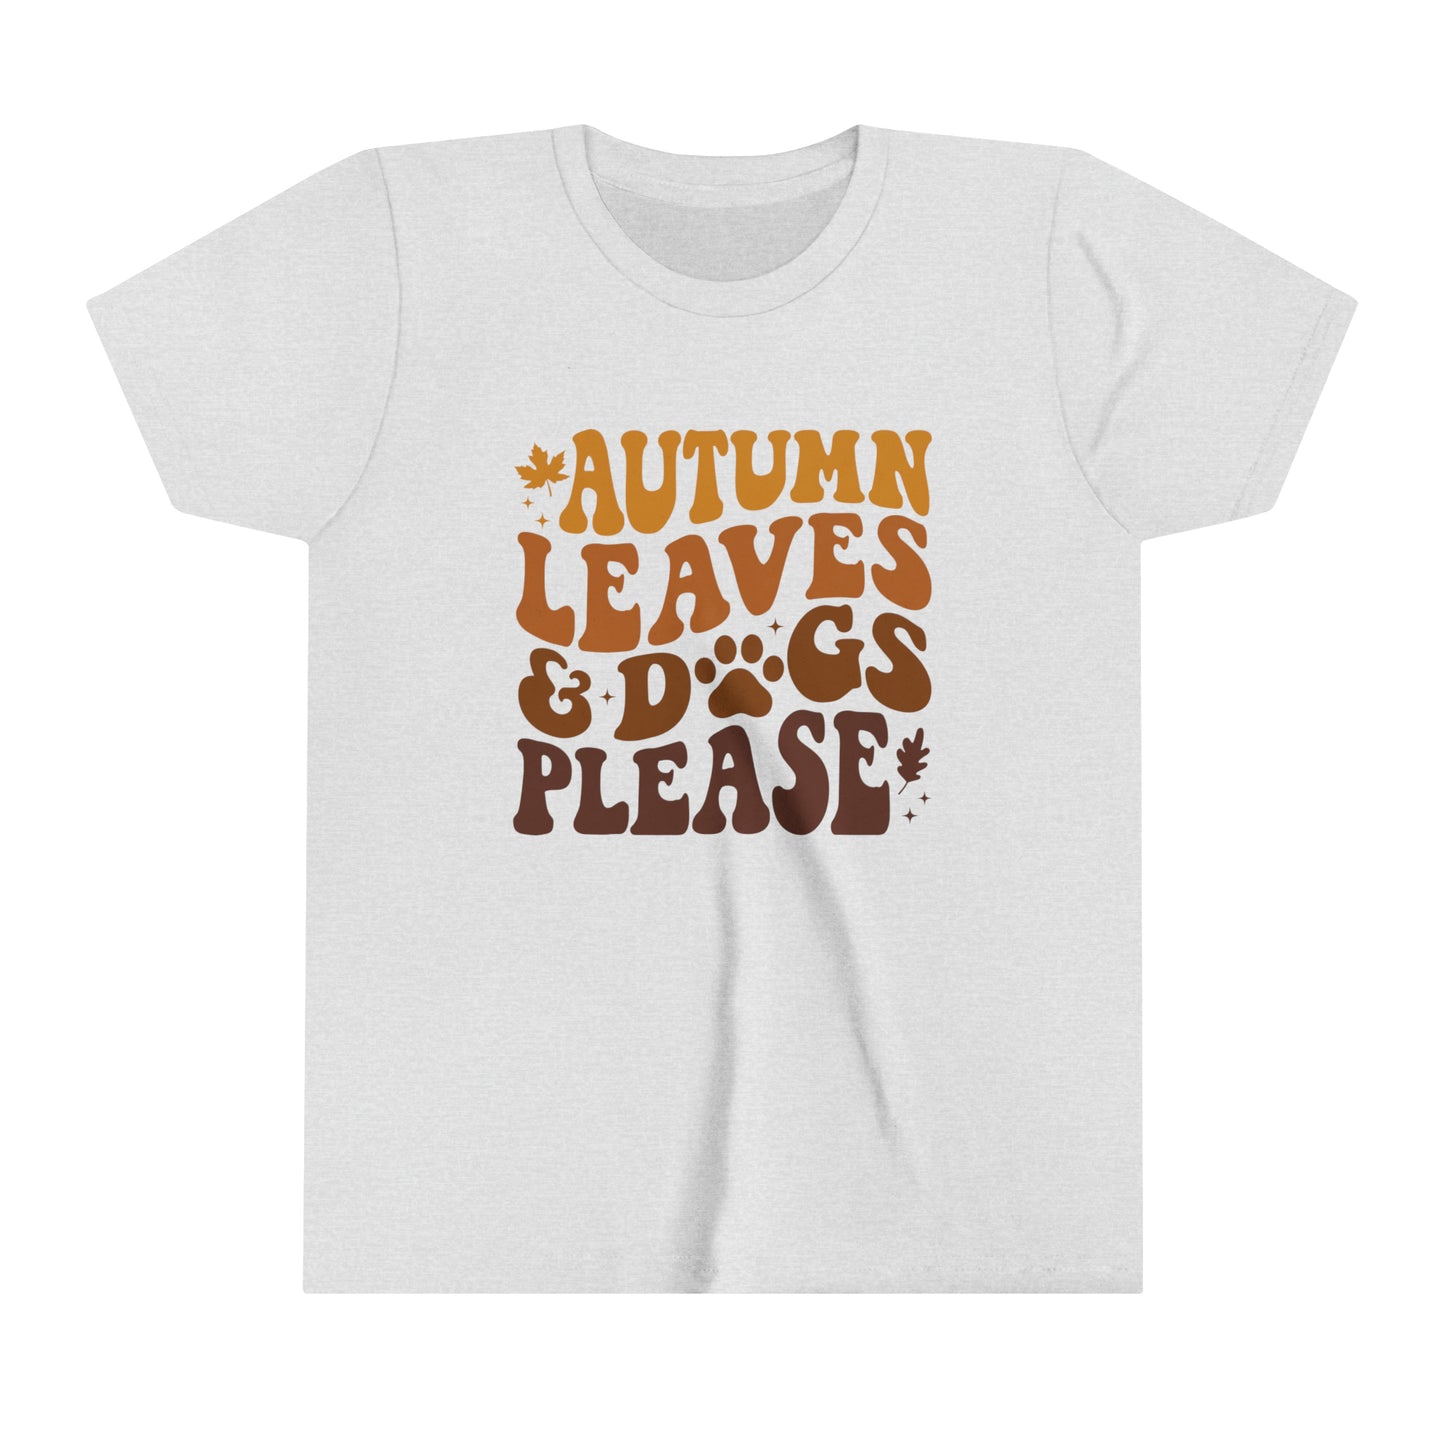 Autumn Leaves and Dogs Please Girl's Youth Short Sleeve Tee